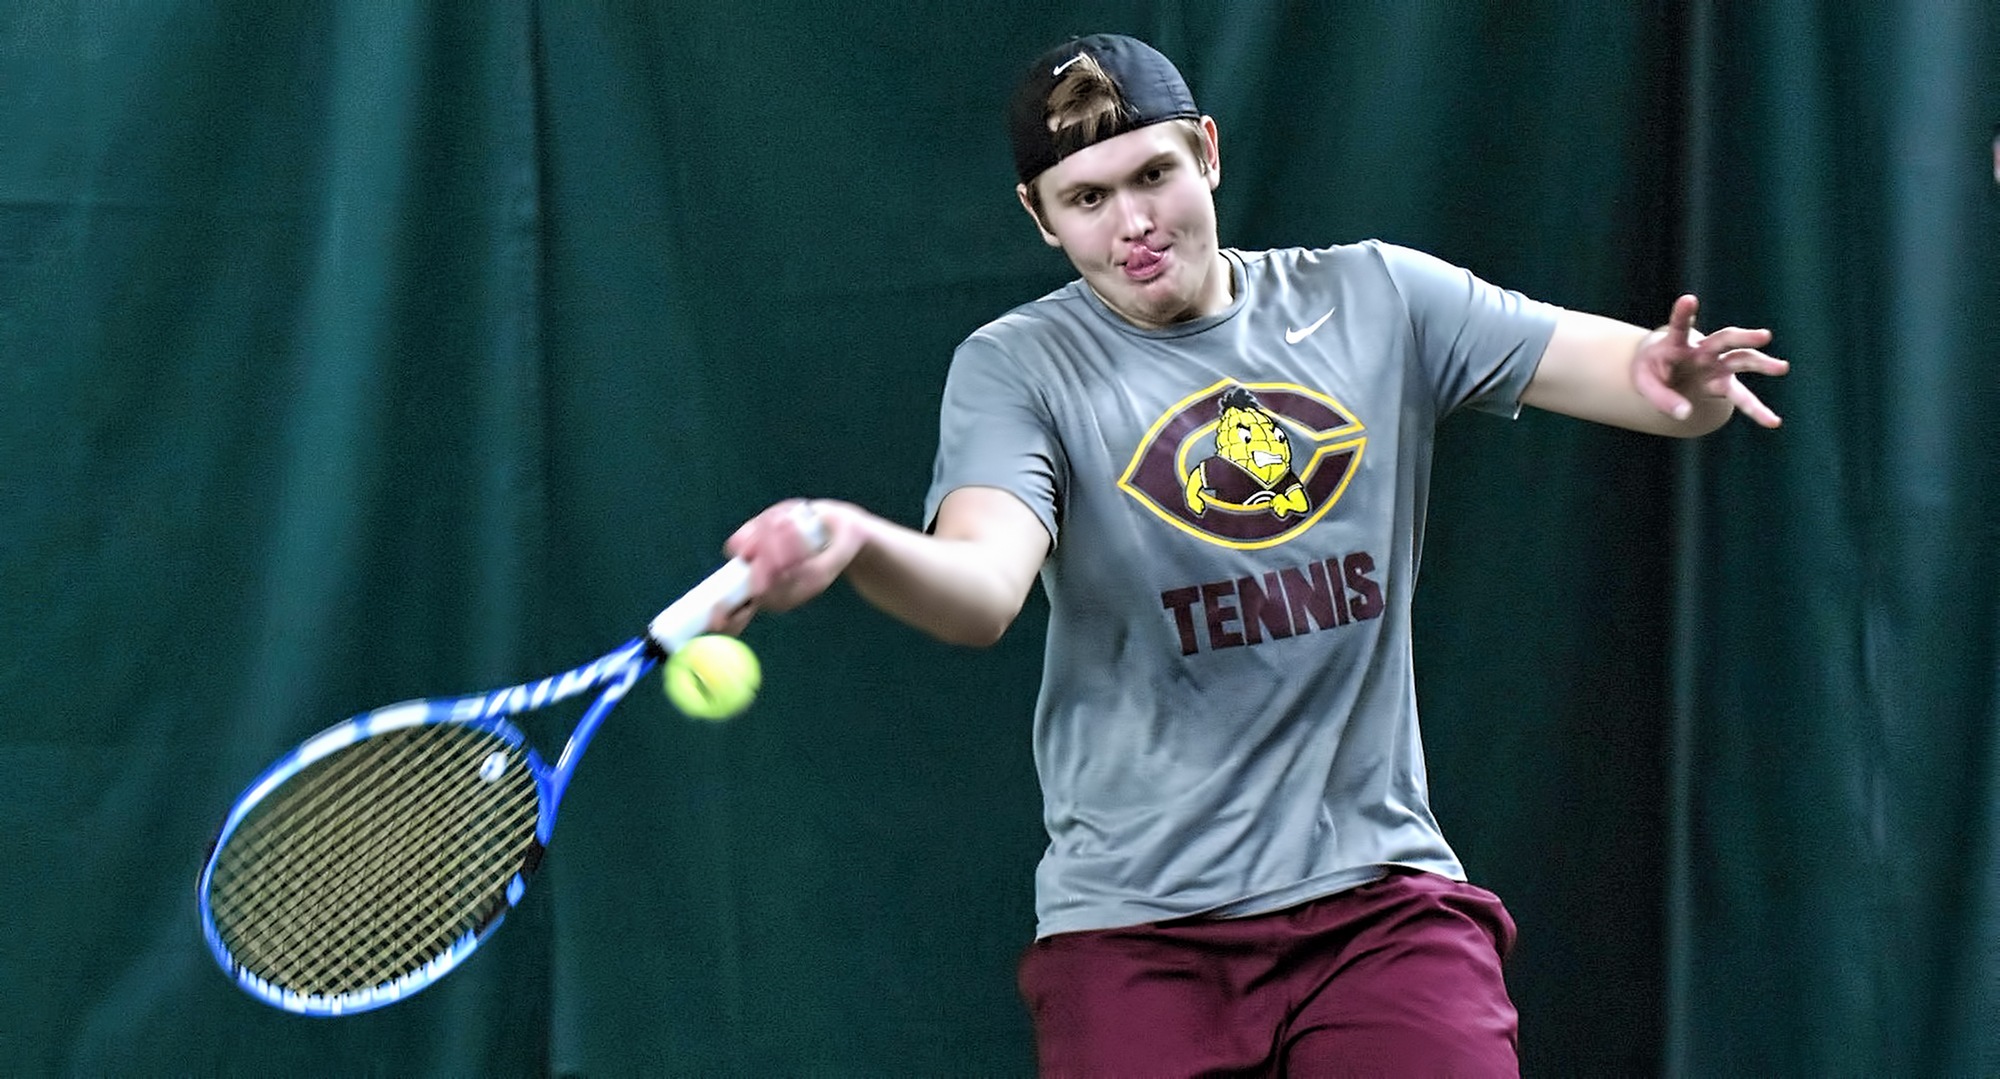 Sophomore Ben Swanson led Concordia in singles wins in Florida. He went 4-1 in his five matches.